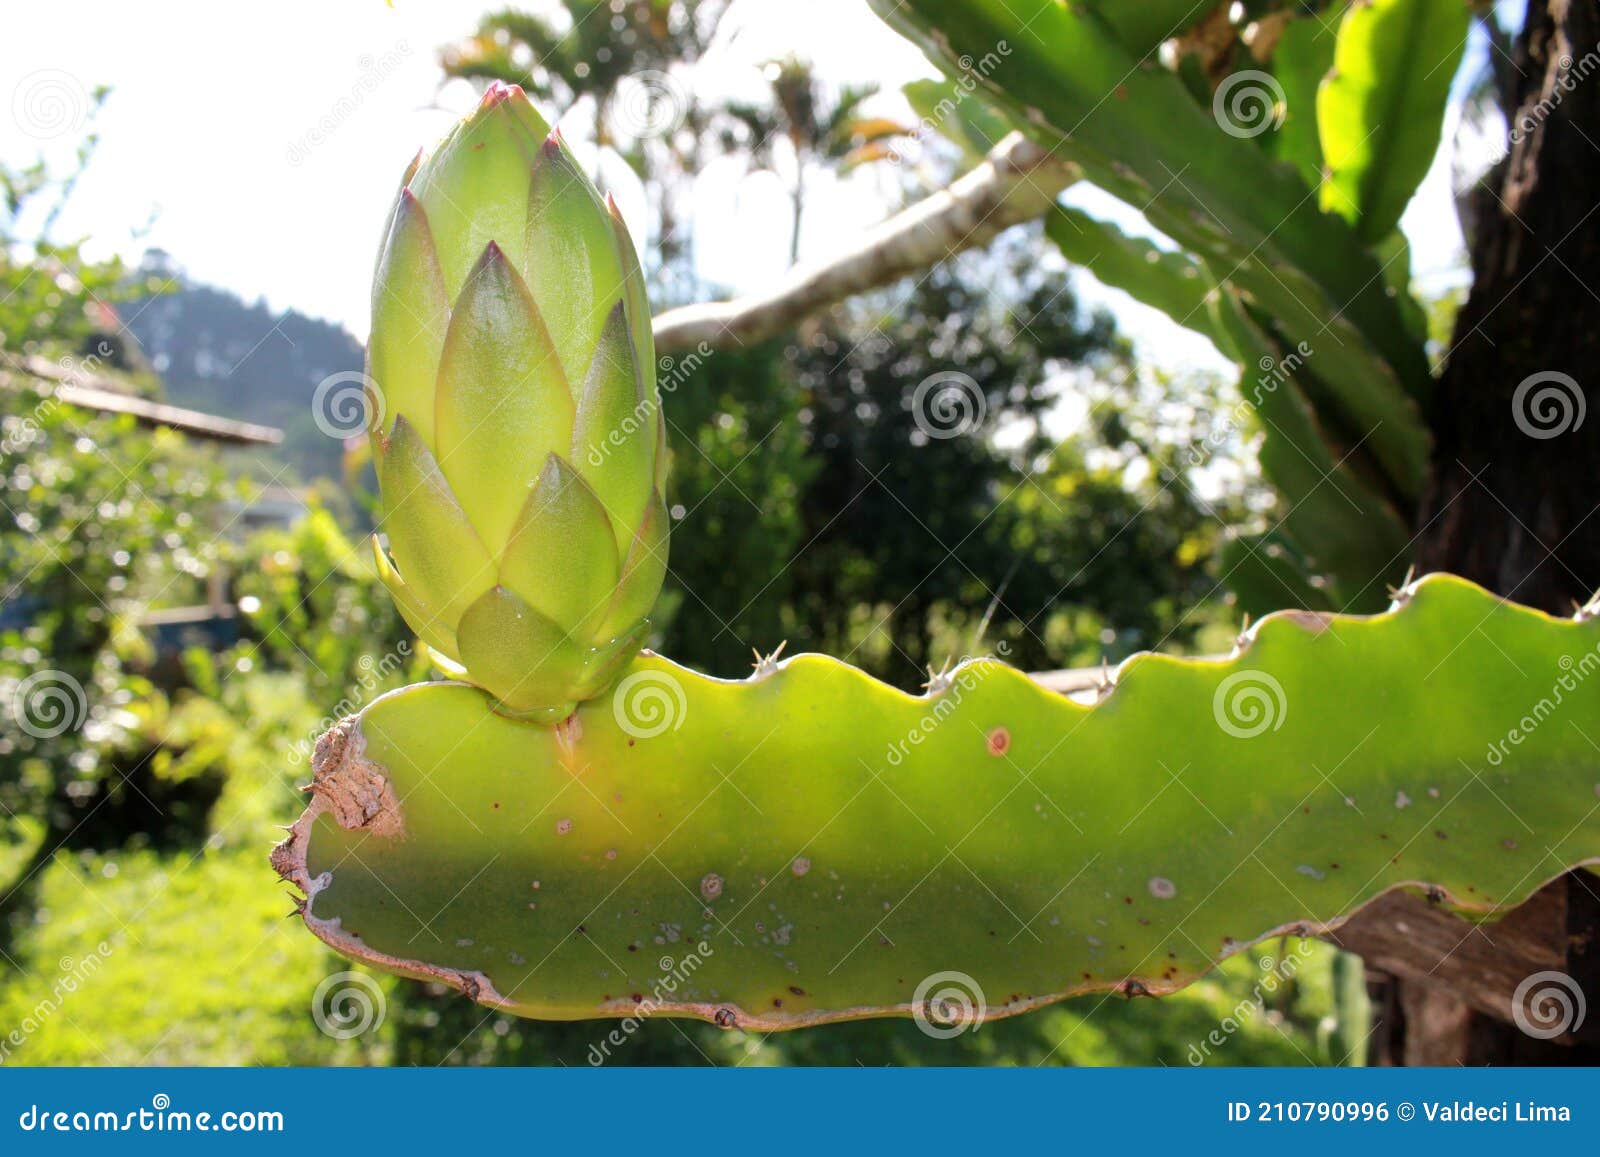 Button of Pitaya Dragon Fruit Flower on a Green Stem. Food Agriculture  Stock Photo - Image of summer, natural: 210790996